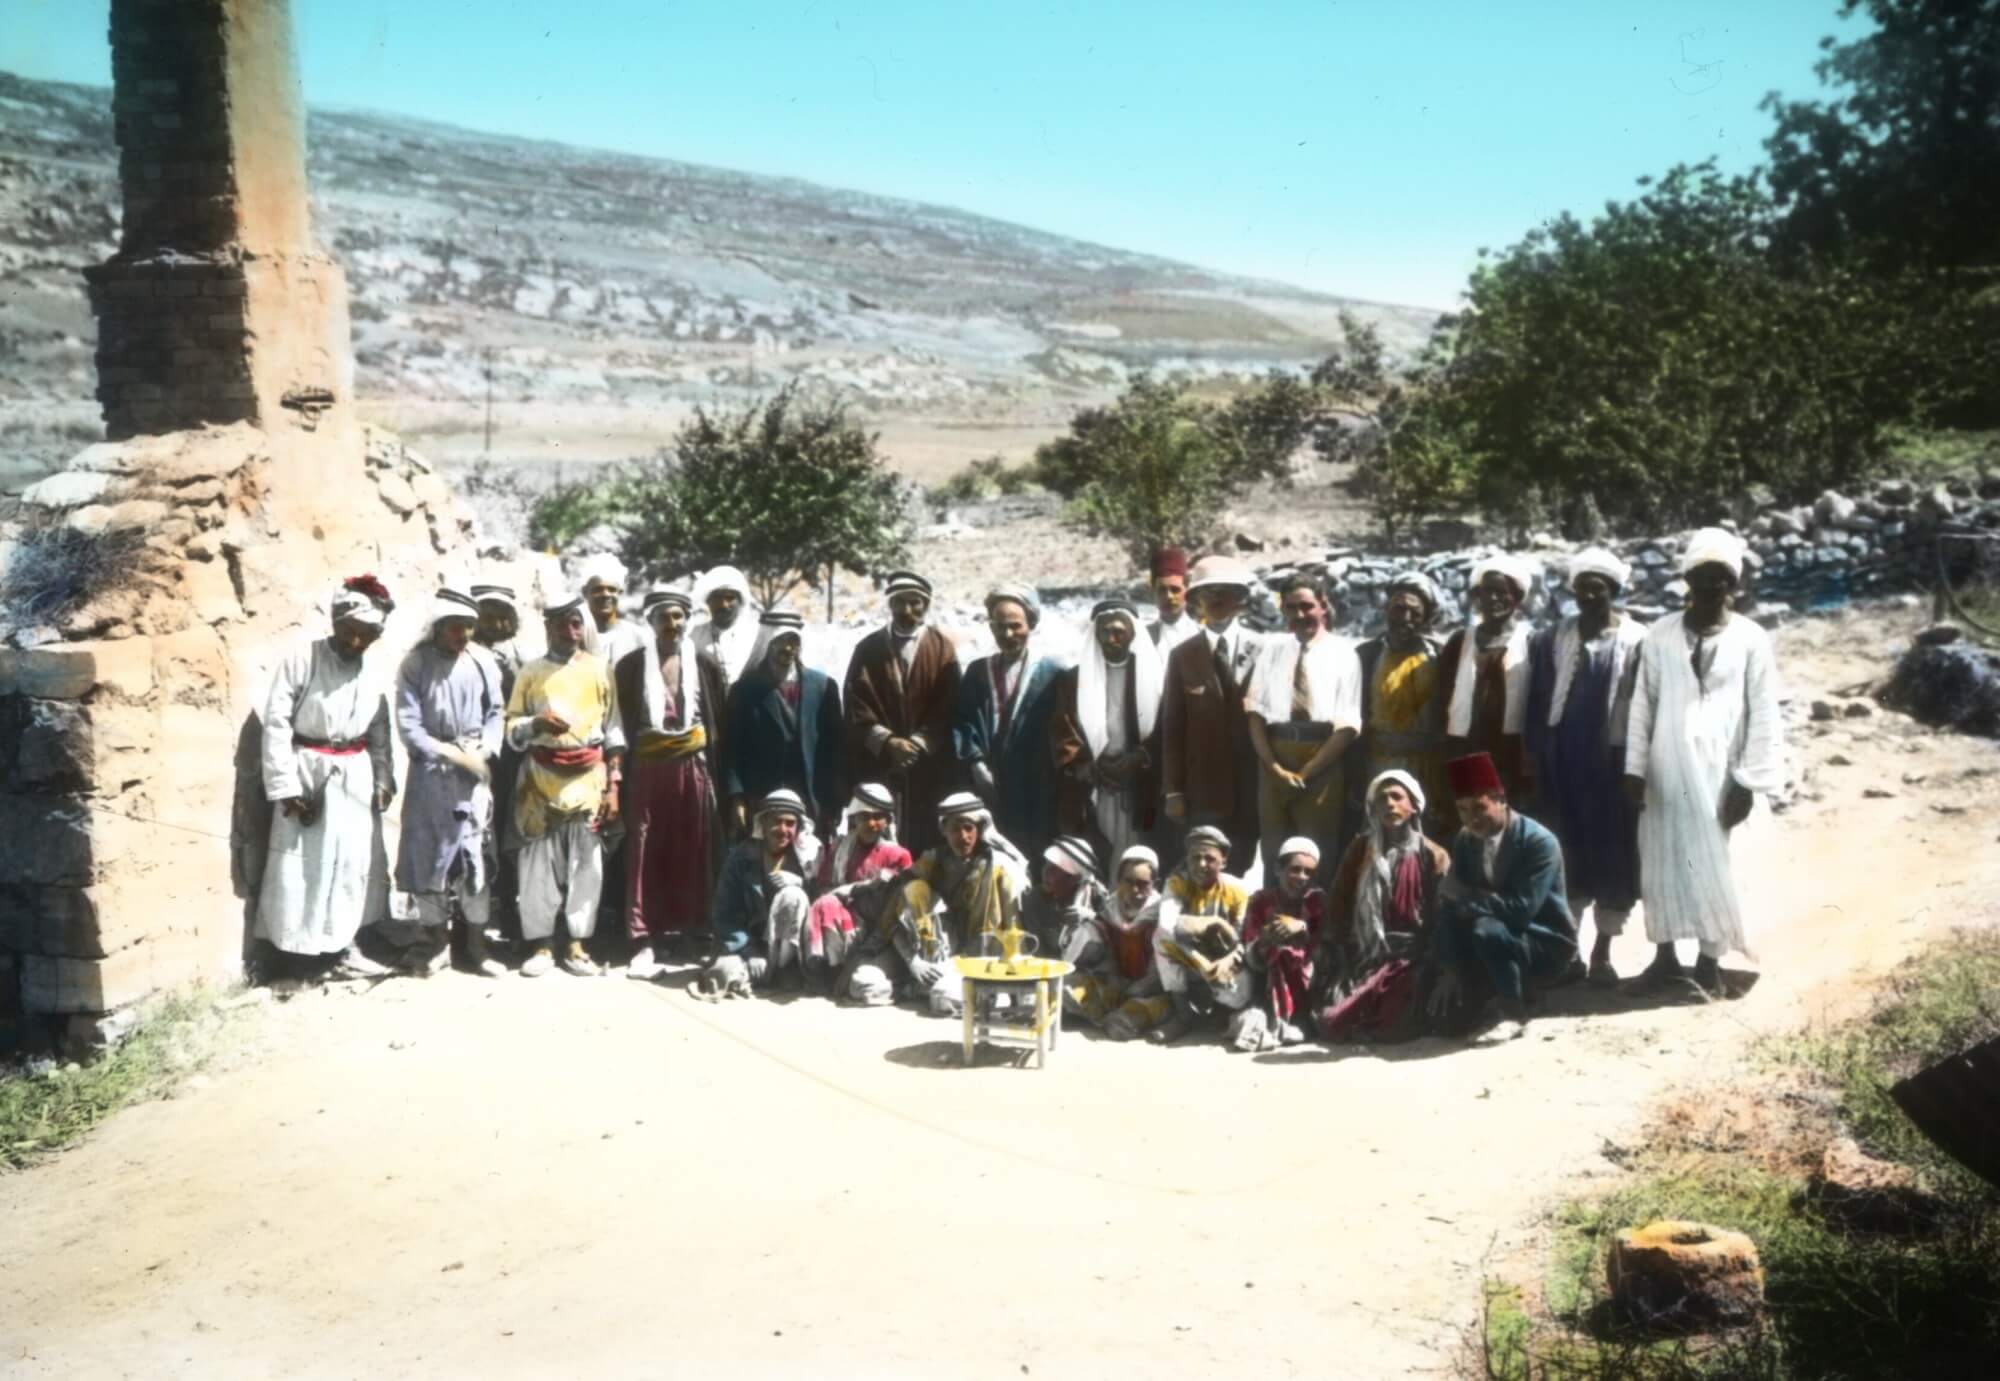 Figure 5. Expedition staff and laborers, 1926. Badè Museum photographic archive 85 N P.I. 01. Colorized lantern slide. Courtesy of the Badè Museum, Pacific School of Religion.